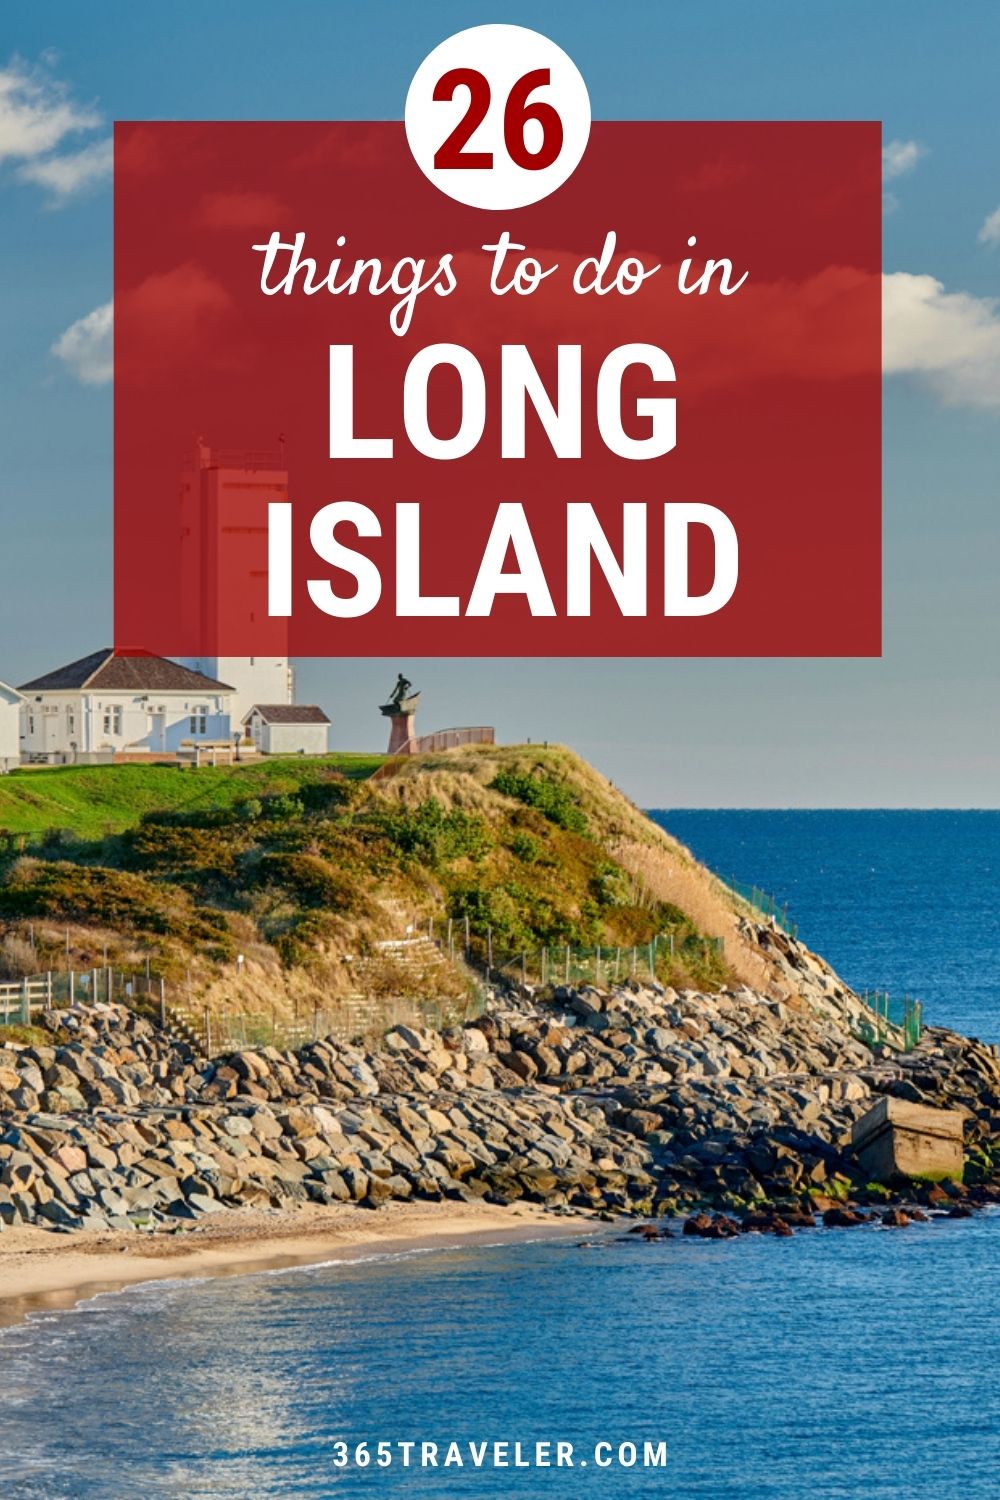 26 THINGS TO DO IN LONG ISLAND YOU CAN'T MISS